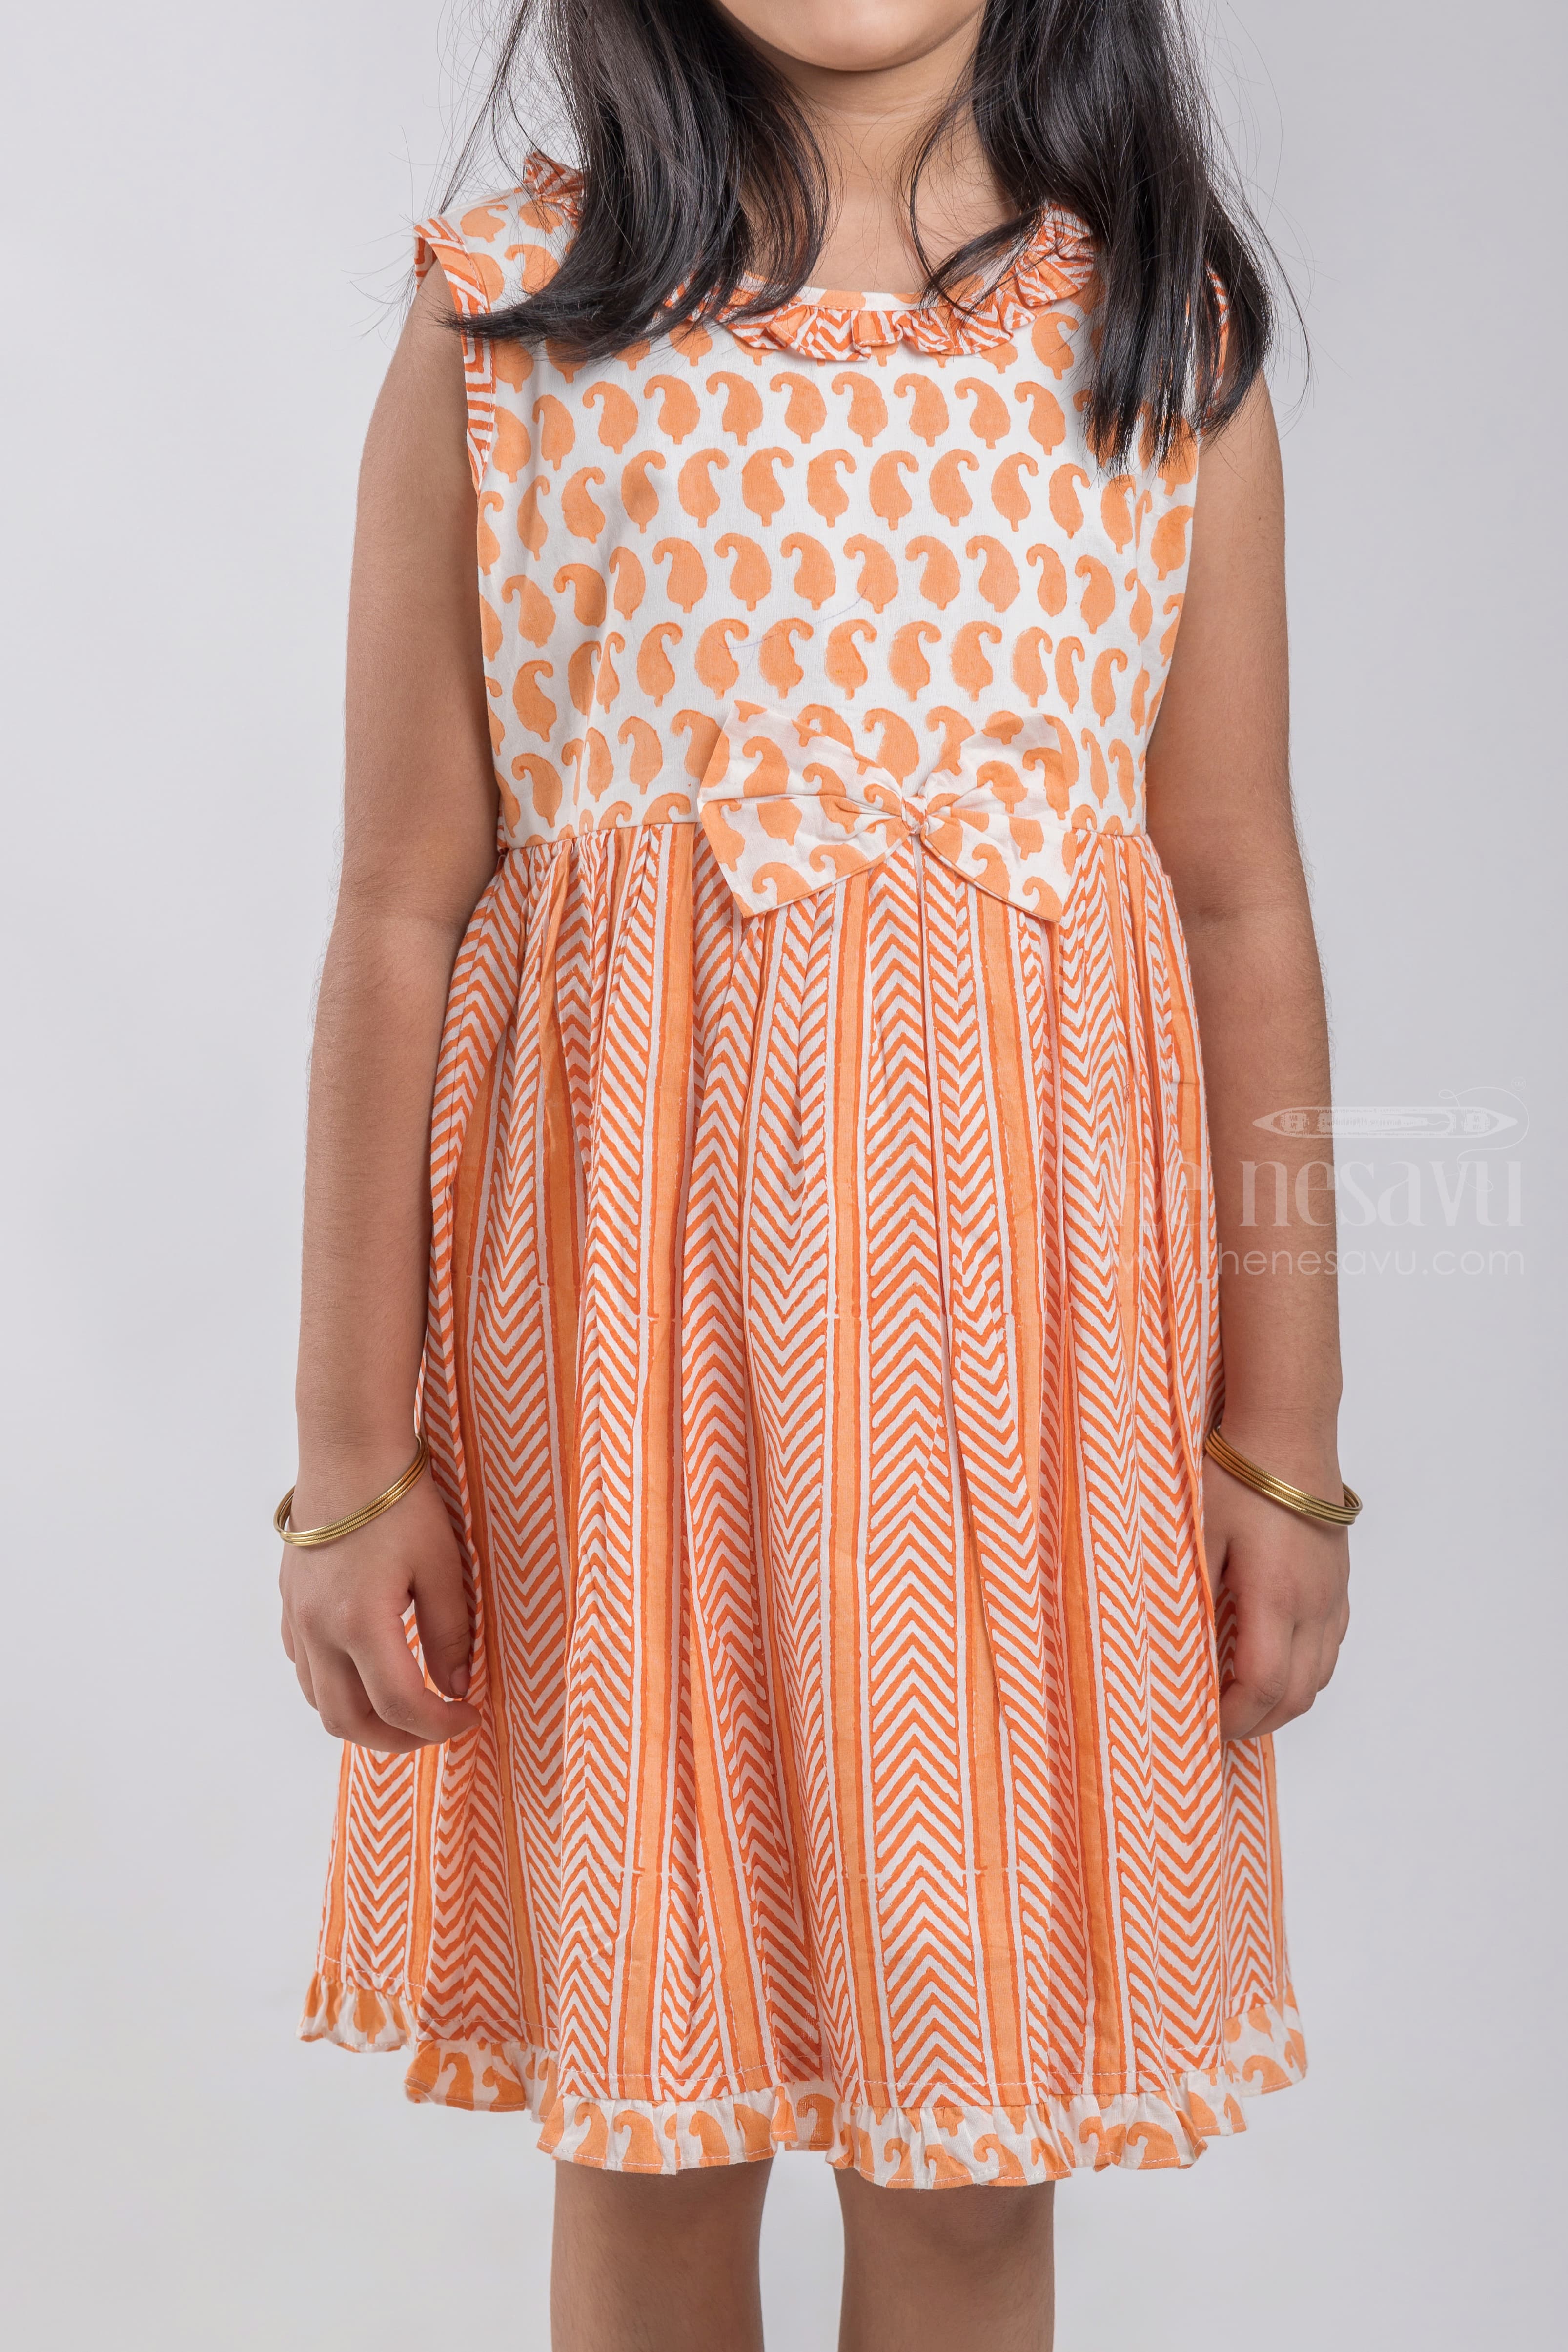 Buy Best Girls Readymade Printed Fancy Frock for Girls Online  TCS Online   The Chennai Silk